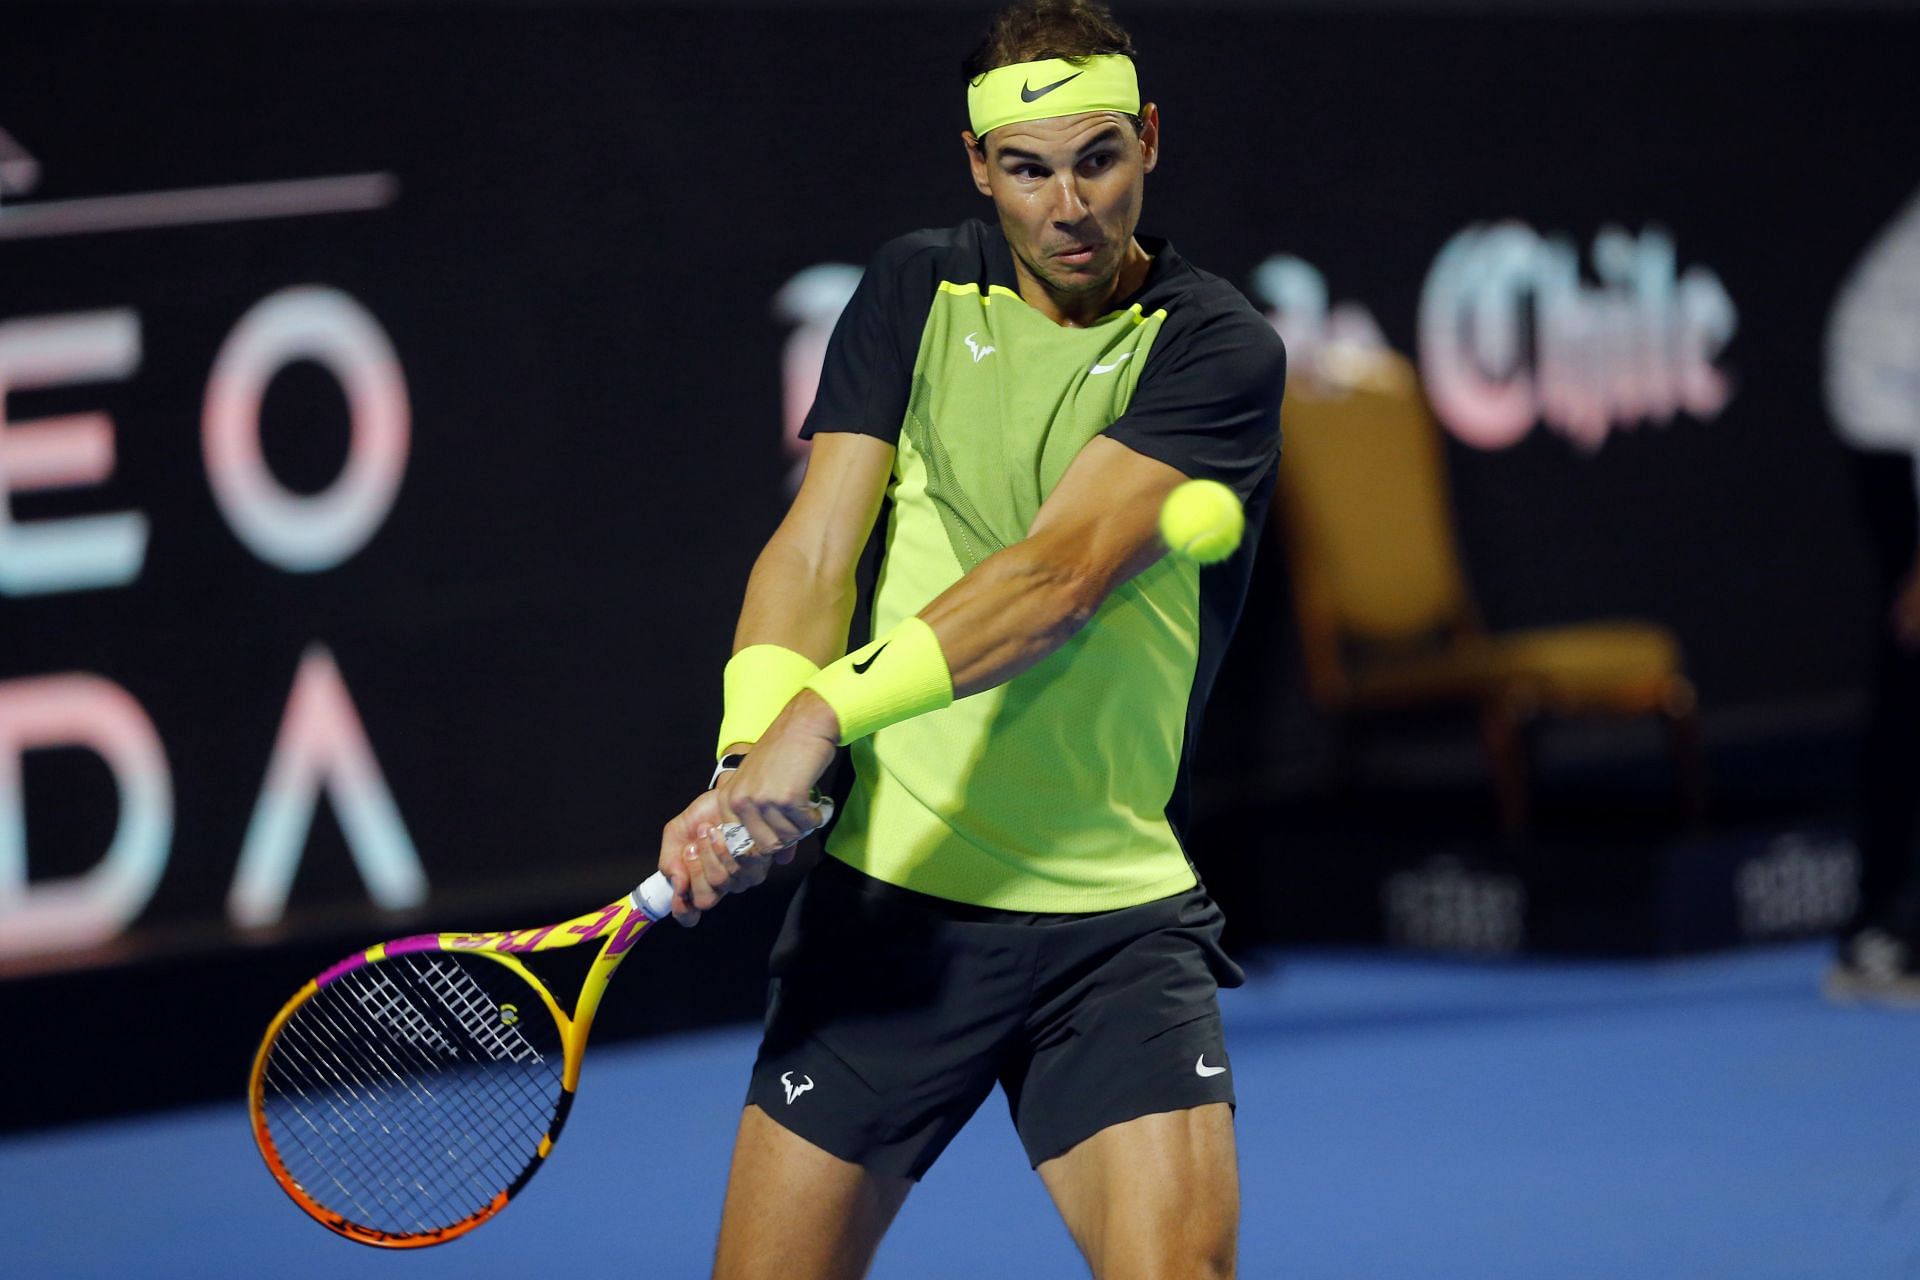 Rafael Nadal completed his Latin American tour on Thursday.